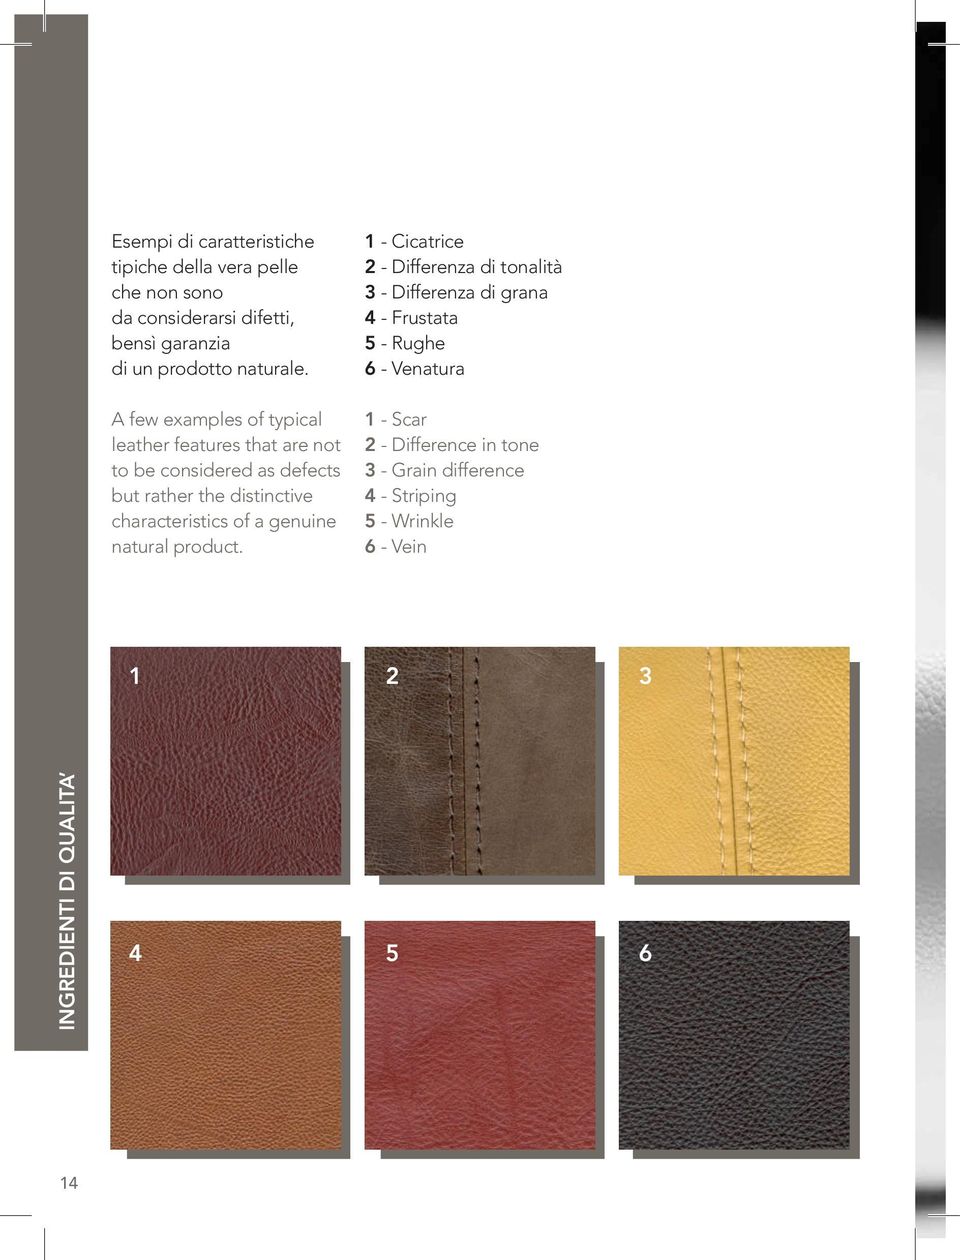 leather features that are not to be considered as defects but rather the distinctive characteristics of a genuine natural